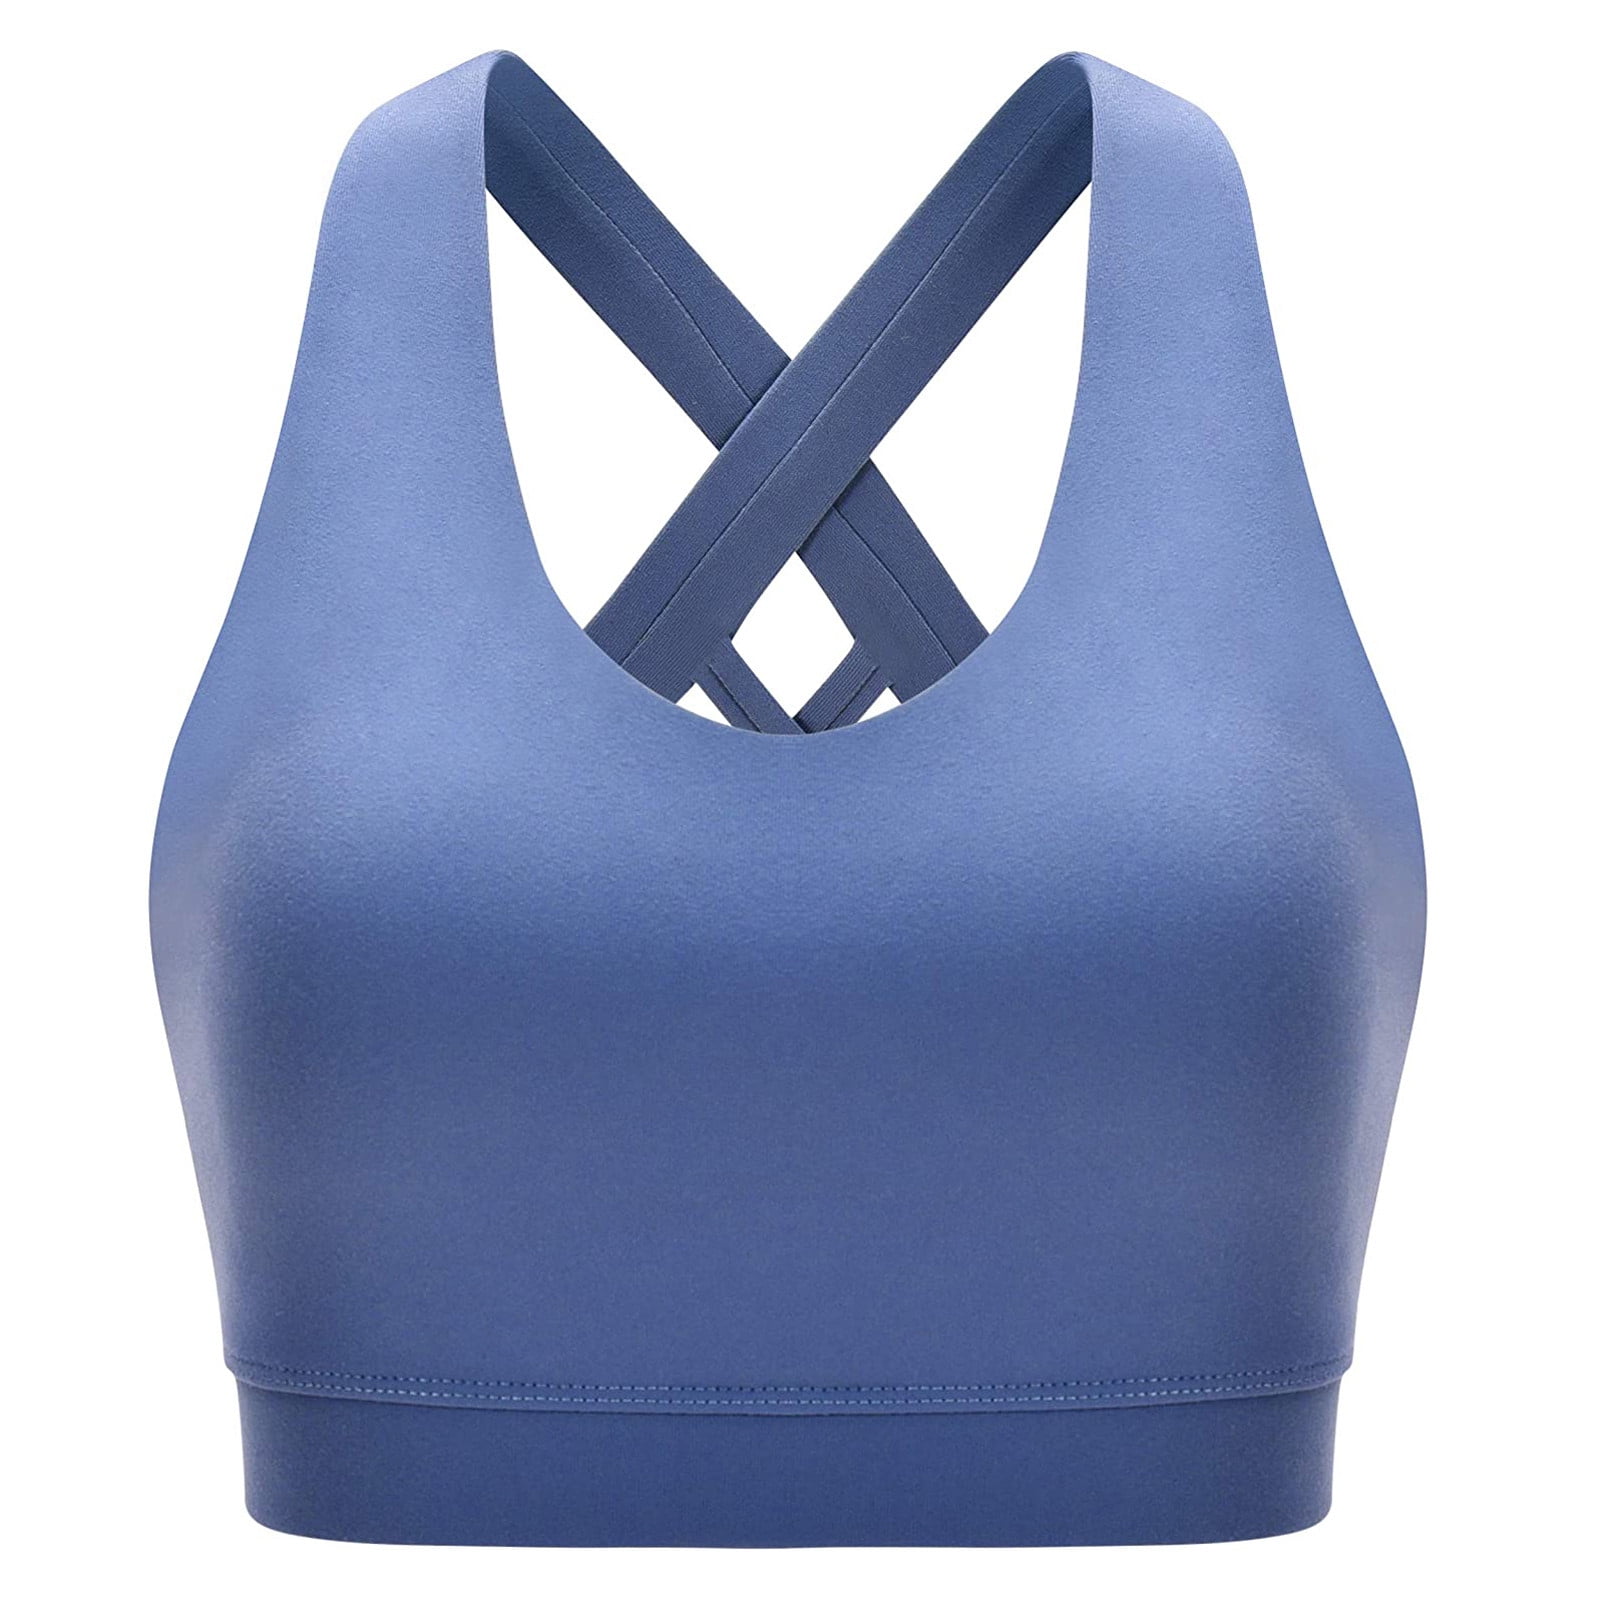 Aueoeo Sports Bras for Women High Impact, Running Girl Sports Bras